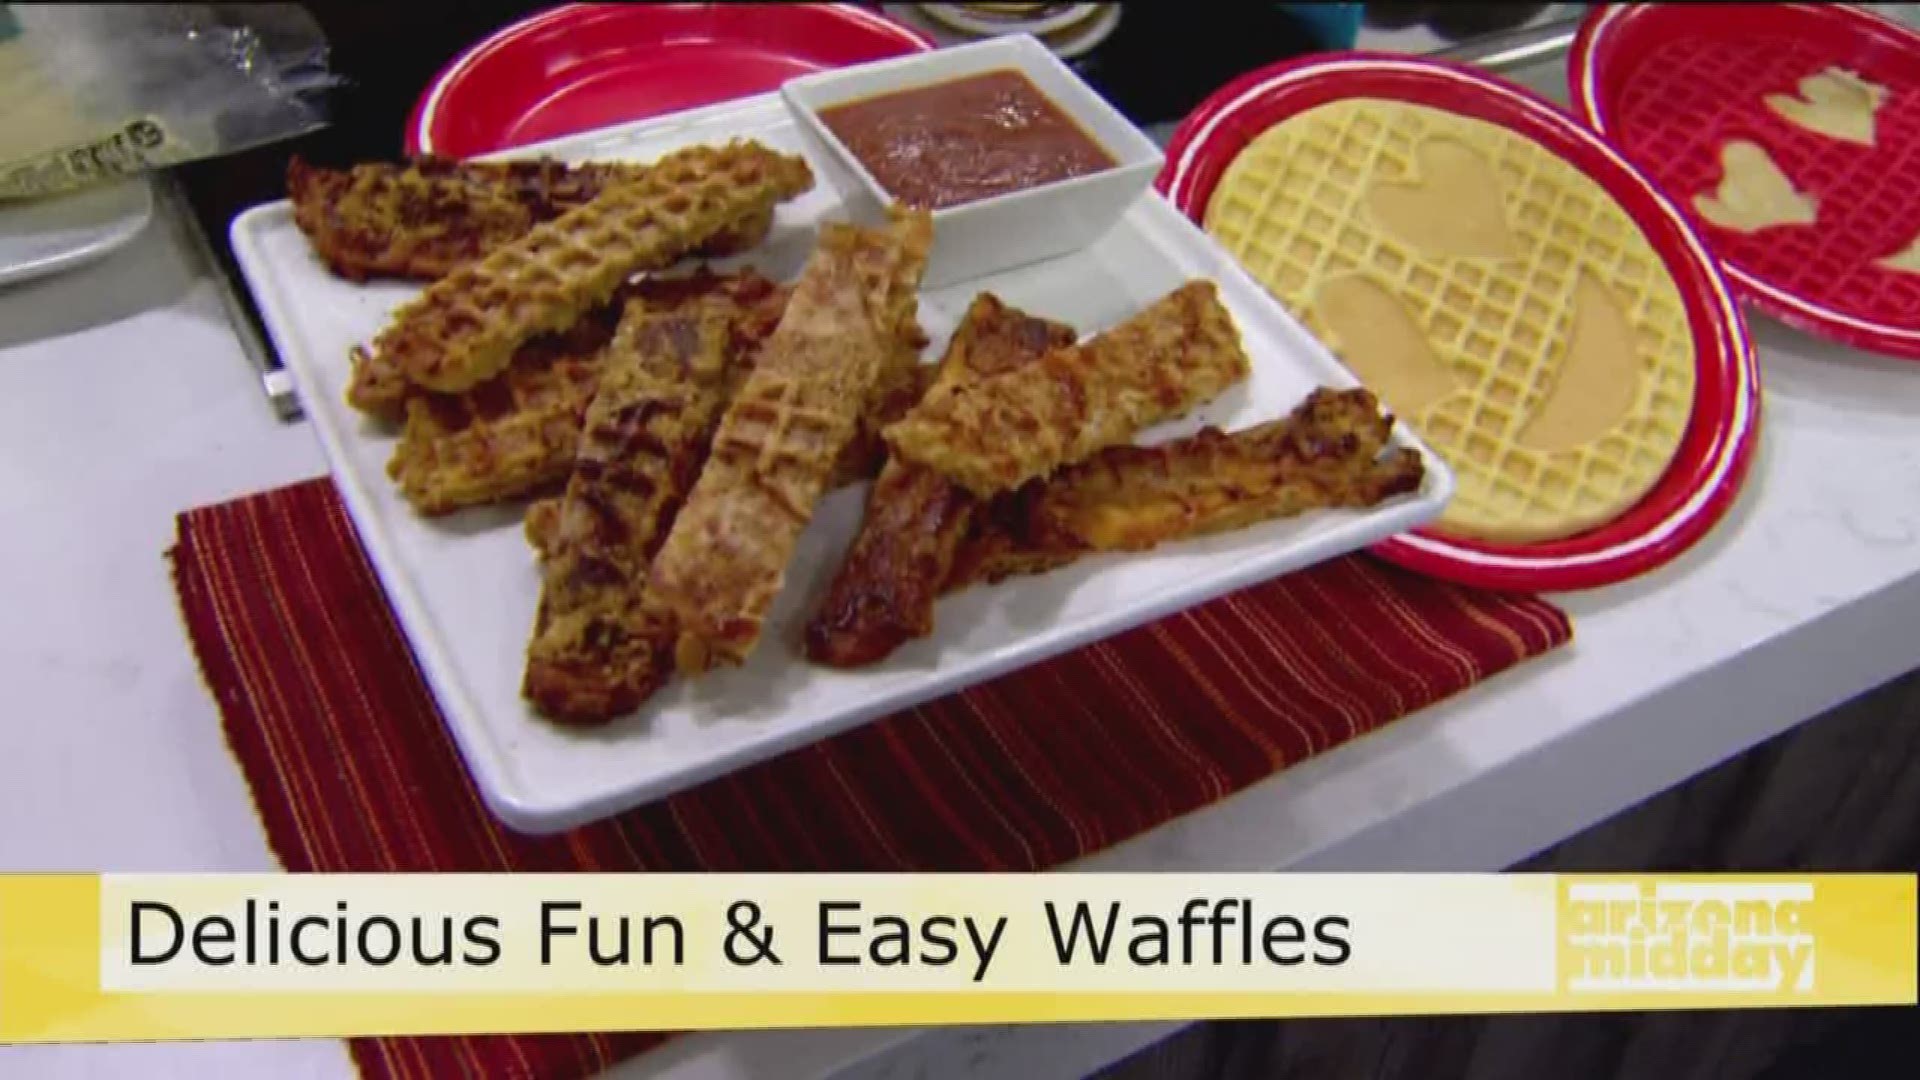 Jan's got the perfect tools and a yummy recipe to take your waffle & pancake game to the next level